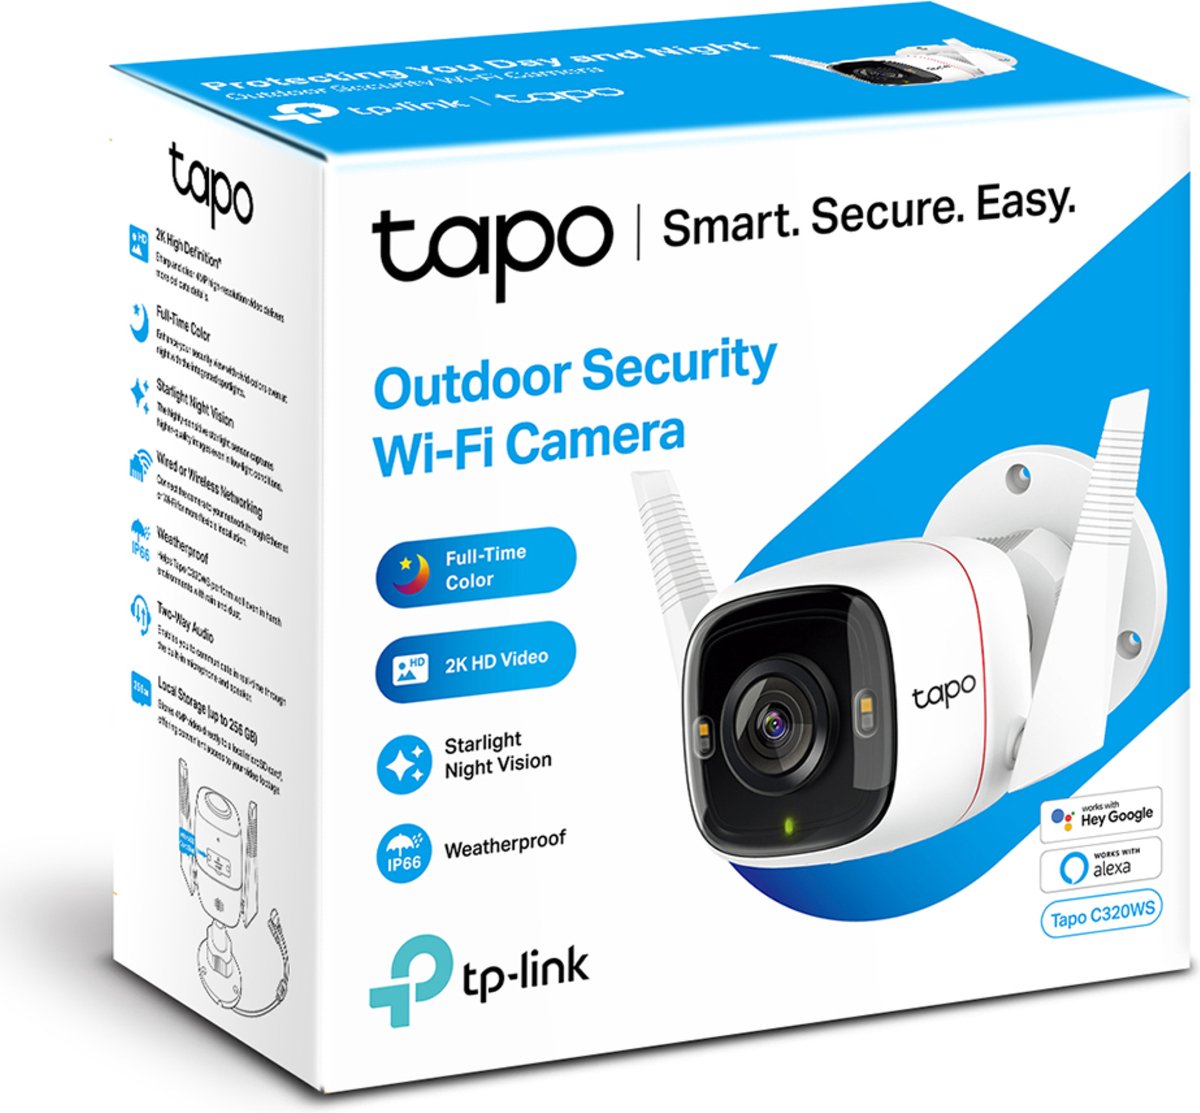 TP-Link IPCam Tapo C320WS Outdoor Security Wi-Fi Camera